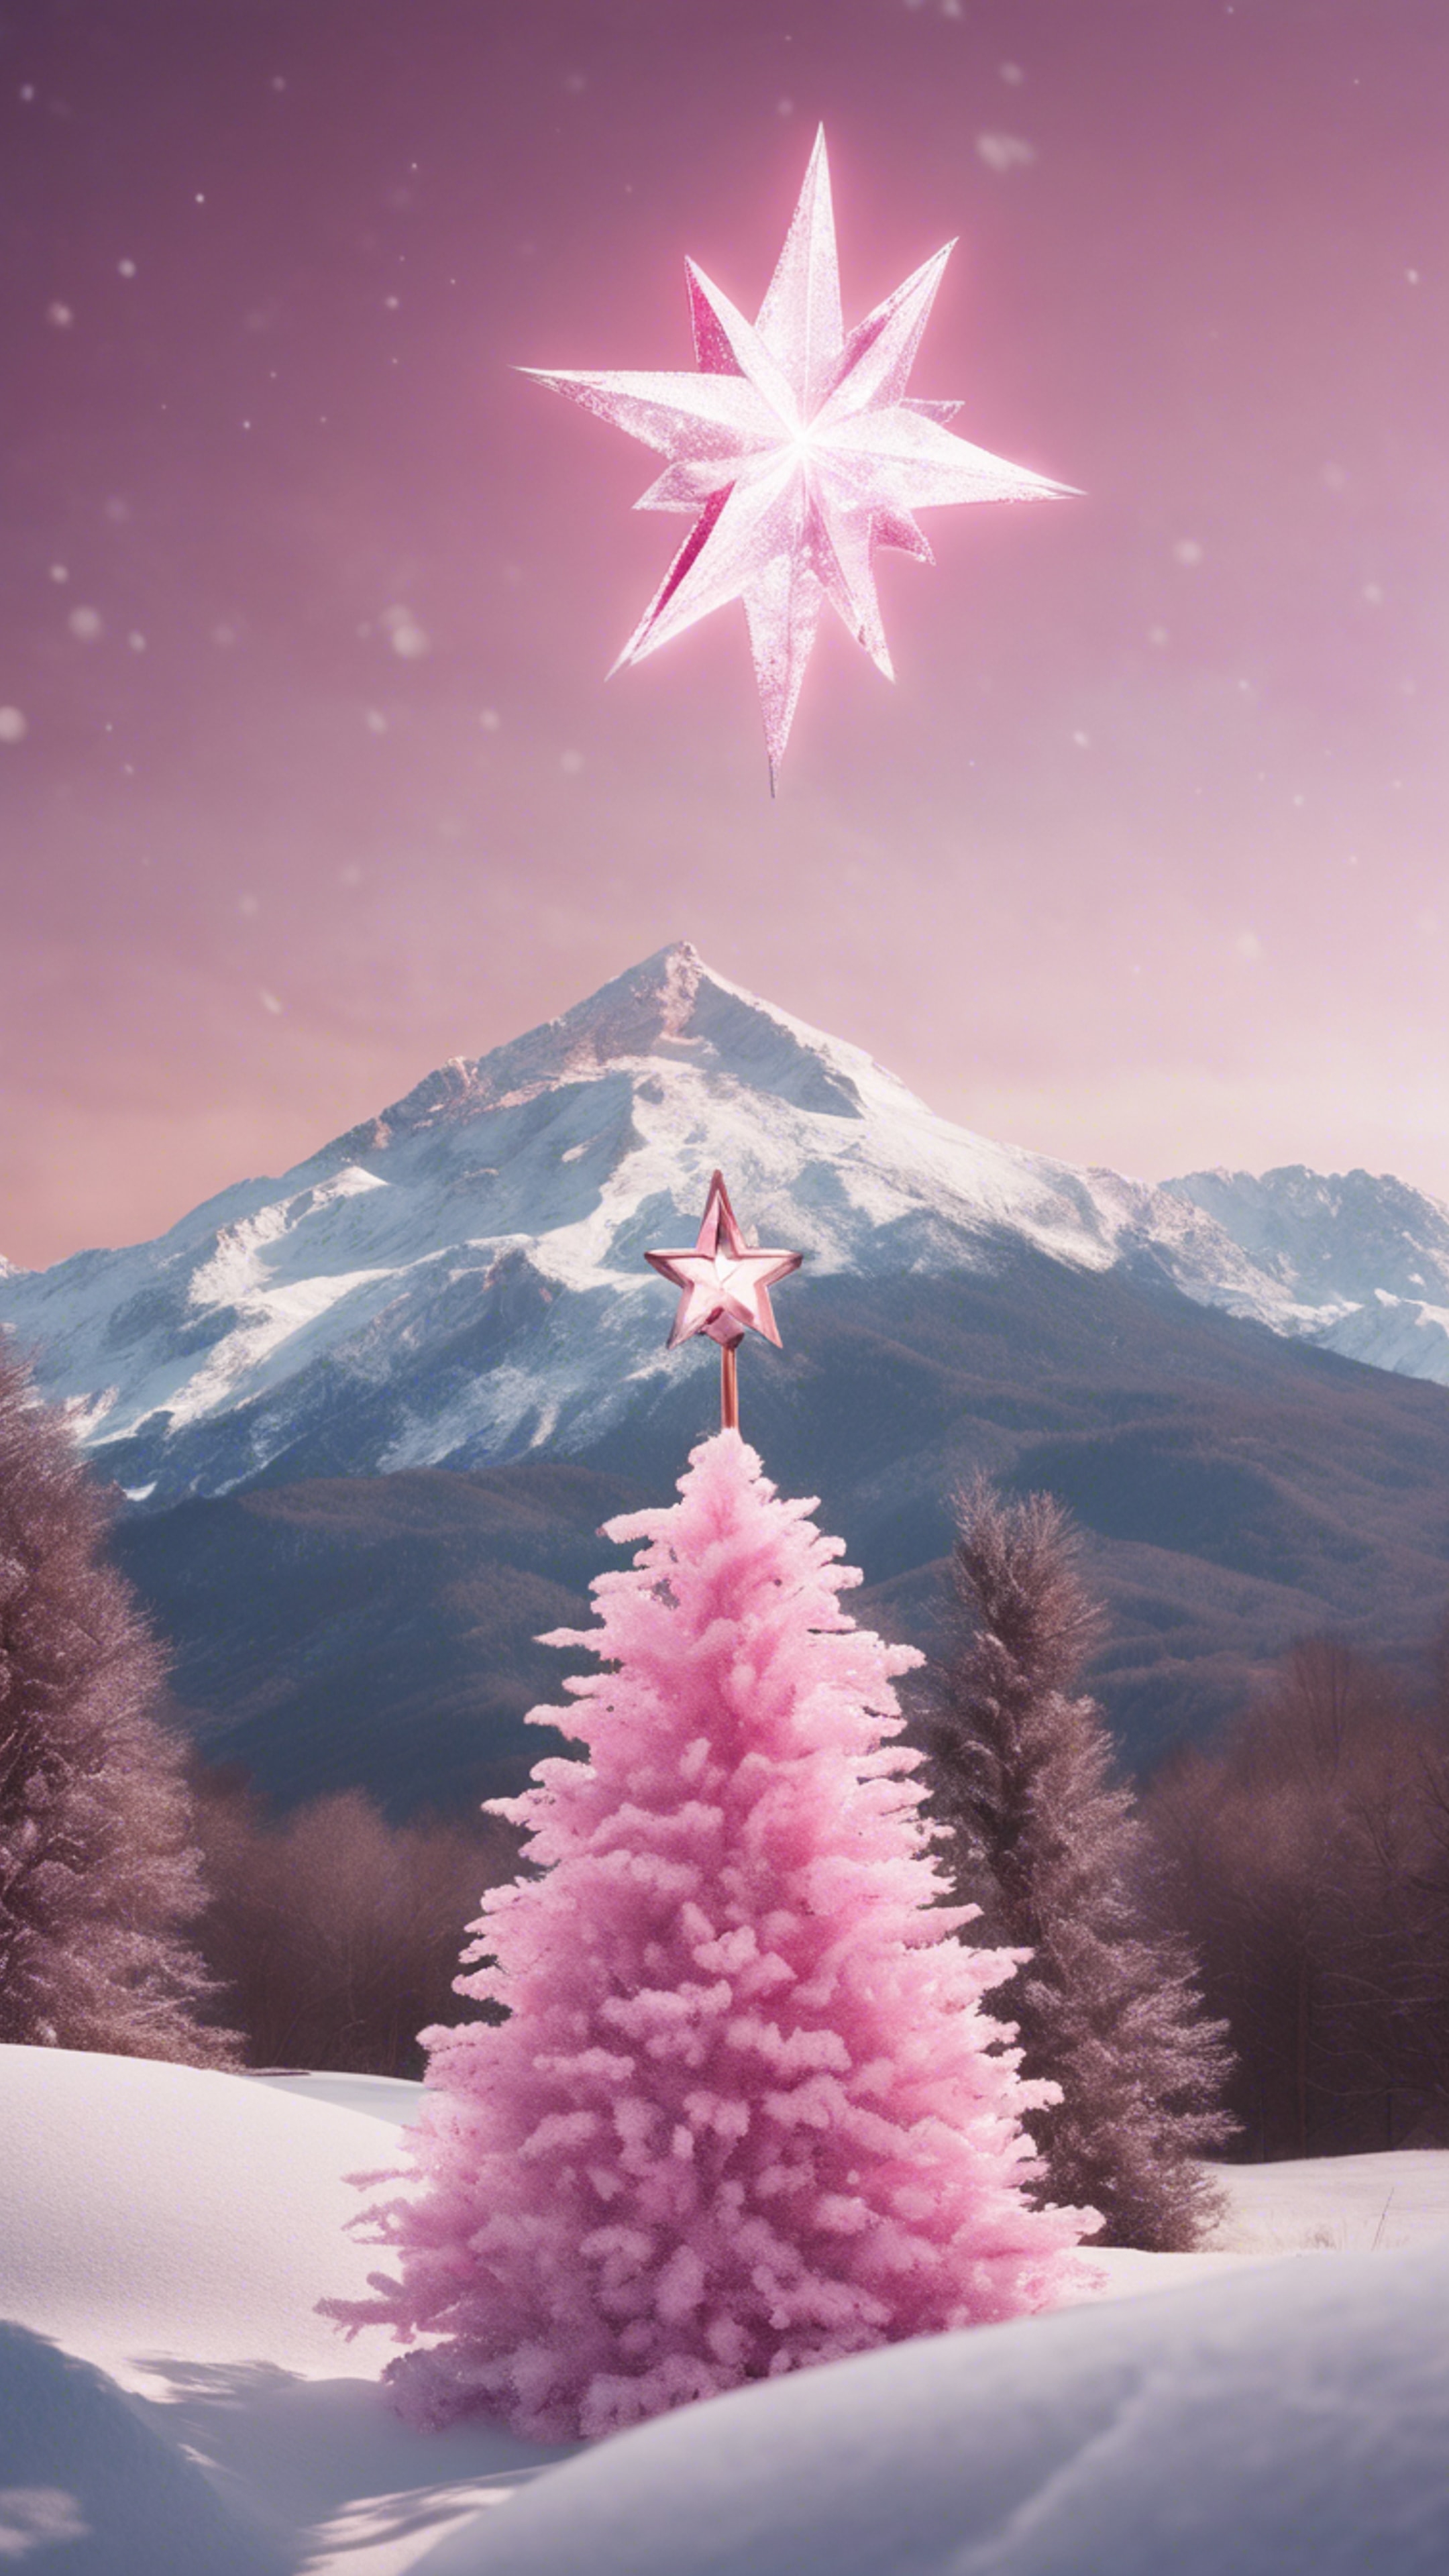 Distant view of a snow-clad mountain with a pink Christmas star shining brightly in the foreground. Kertas dinding[48430a4d610446a898be]